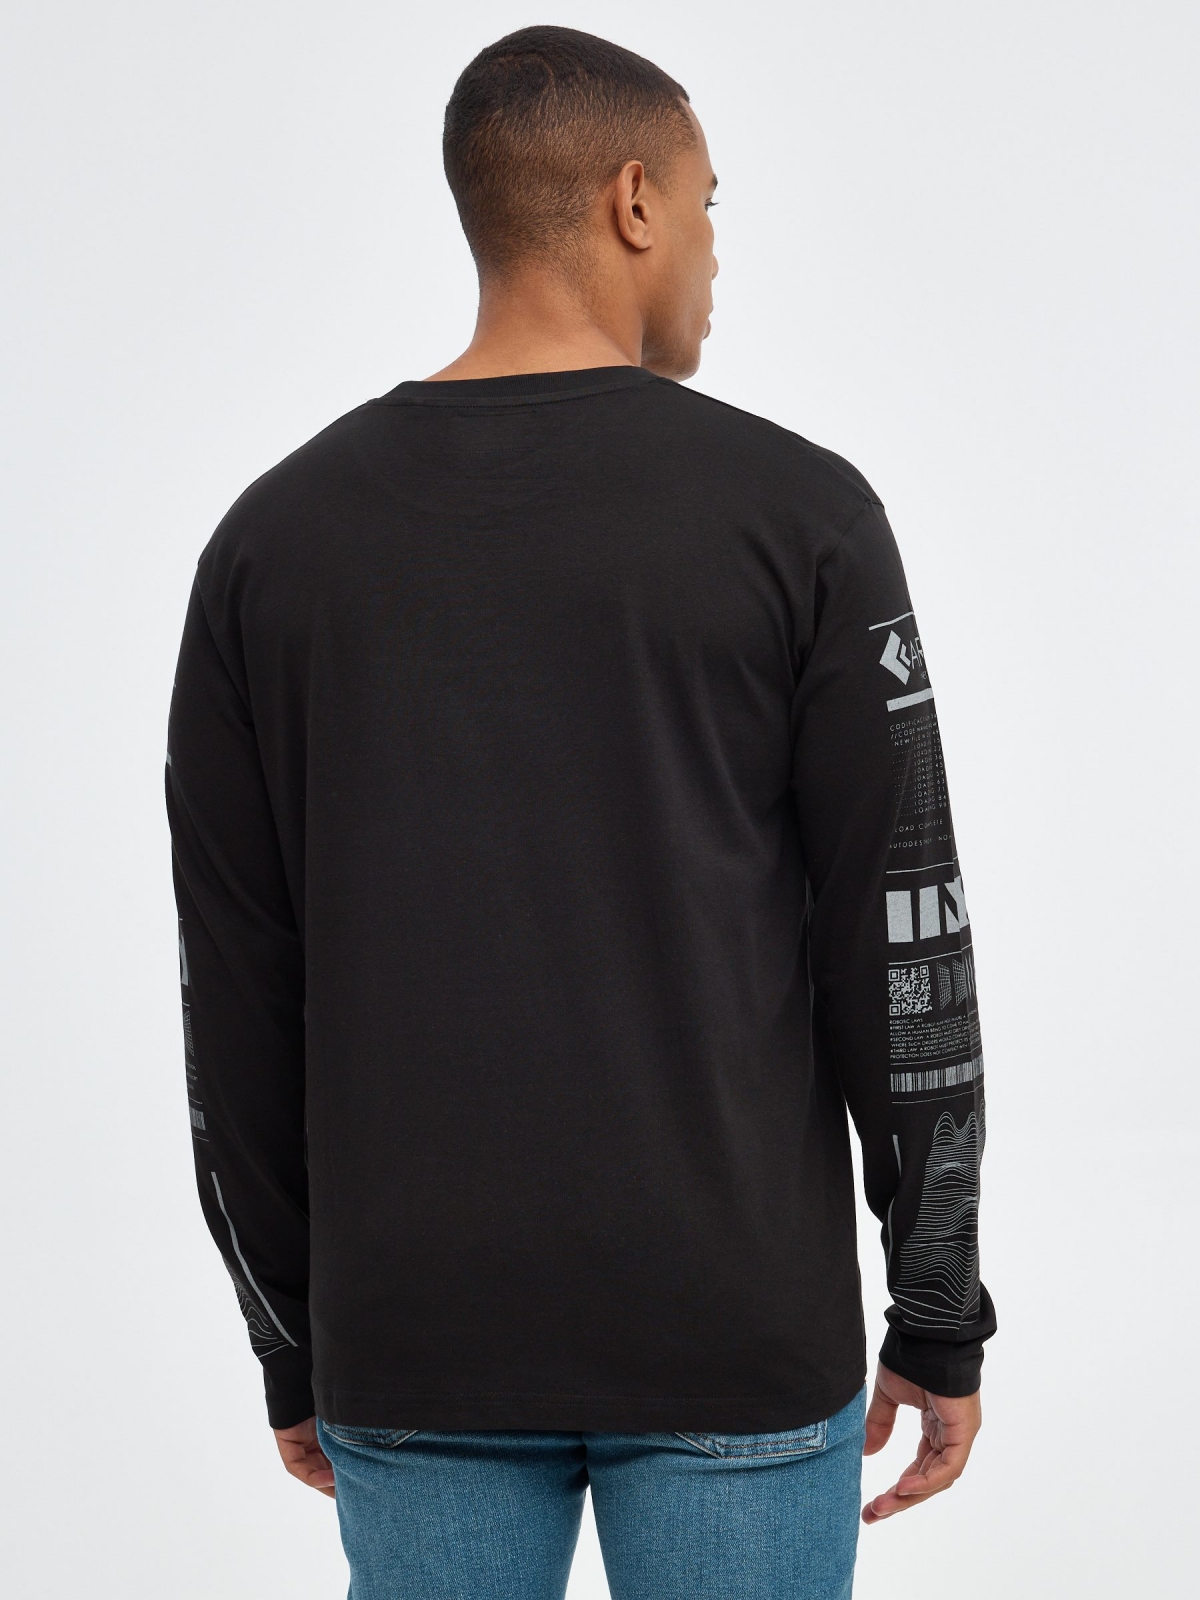 Cyber print T-shirt on sleeves black middle back view